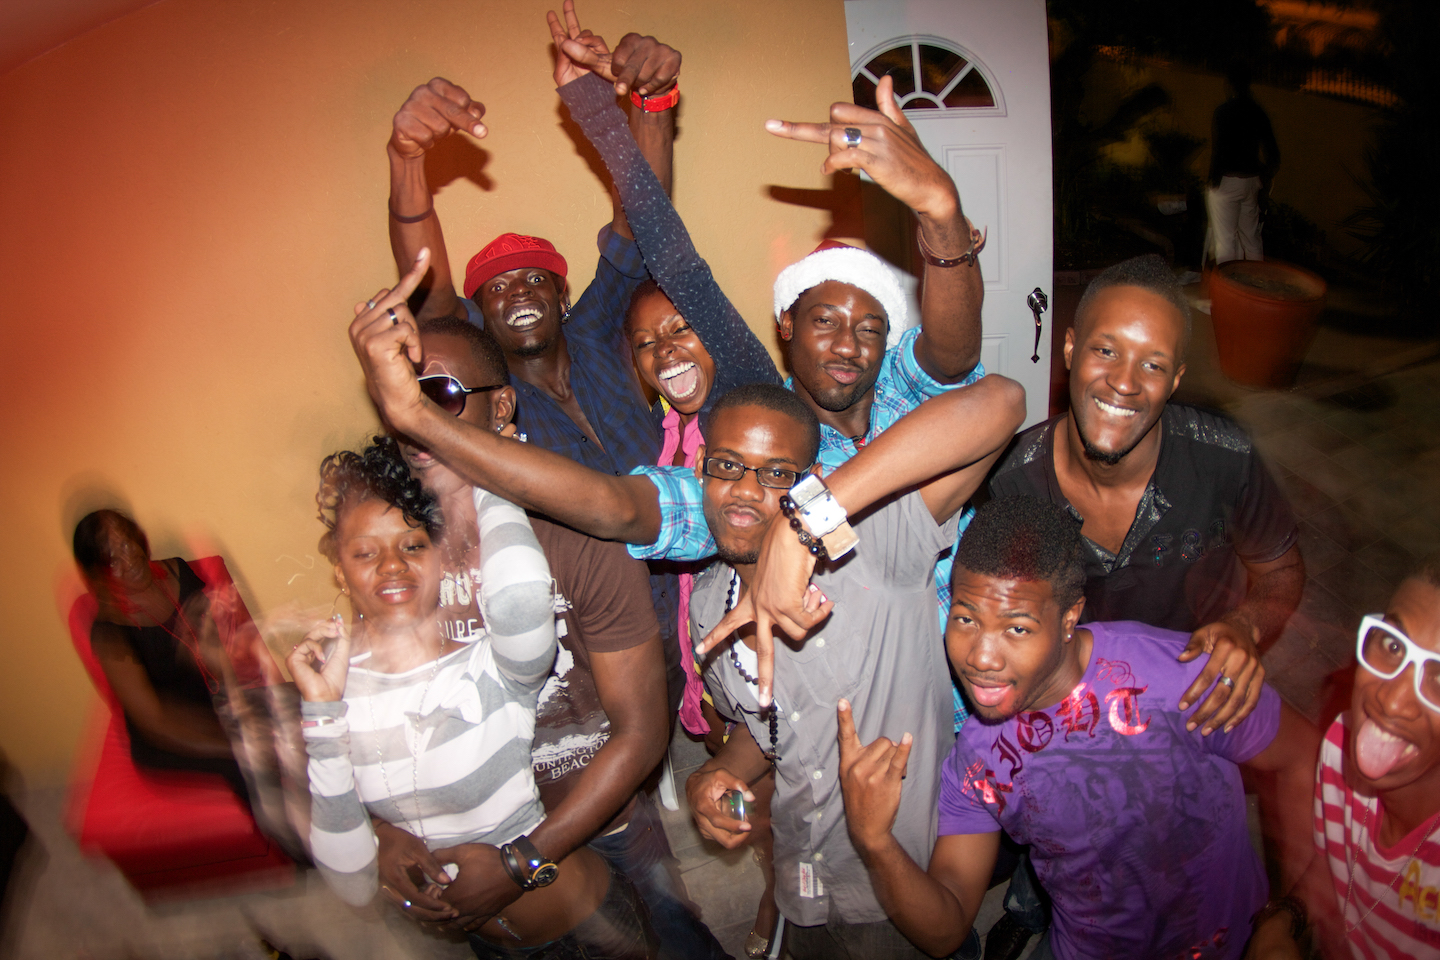 A group of young people pose for the camera at a BMX rider party.